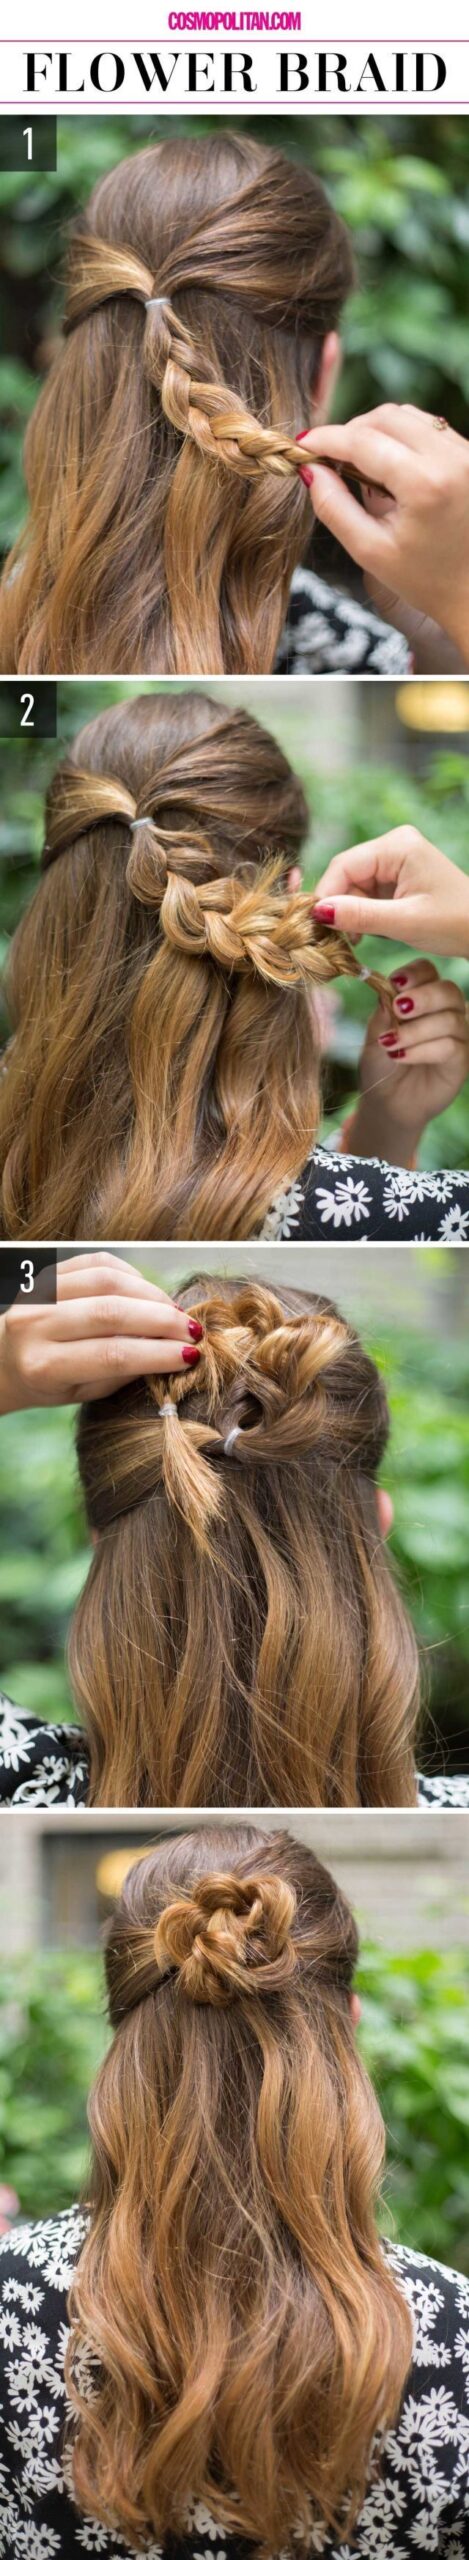 15-Truly-Easy-Hairstyles-You-Can-Do-in-Under-5.jpg